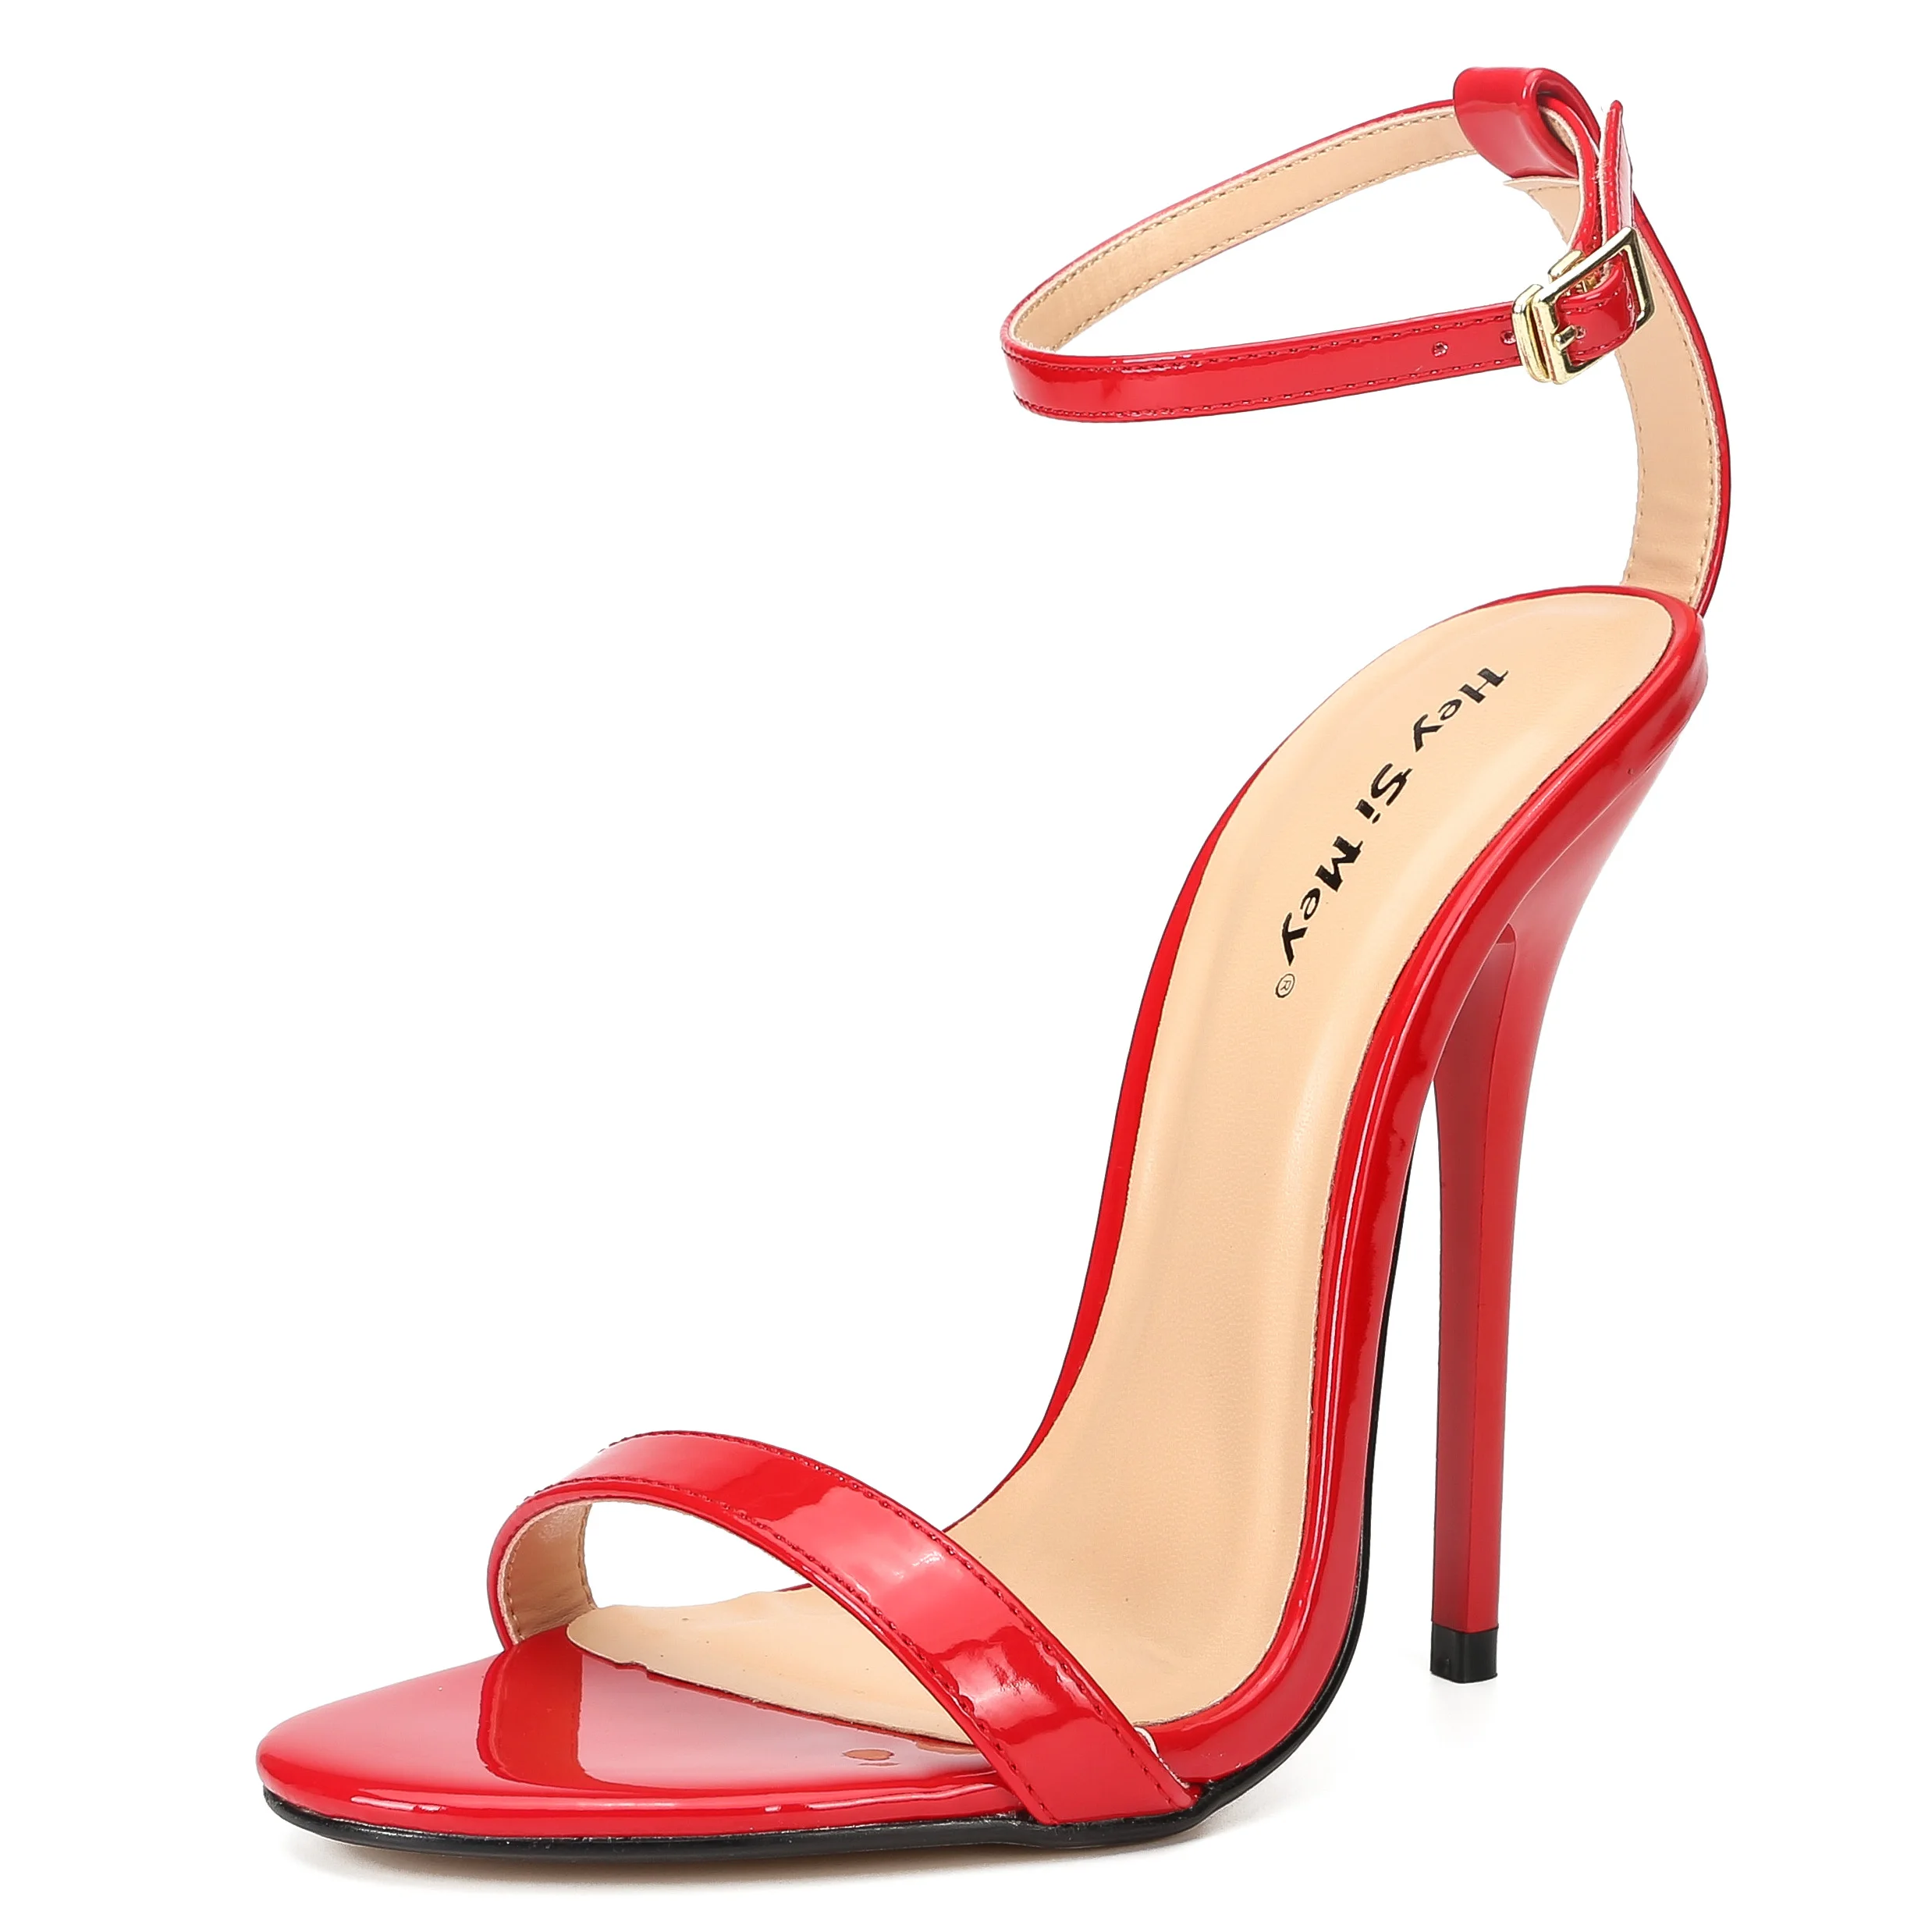 

SDTRFT RED Sandals Ankle strap Shoes Woman Wedding Stiletto Zapatos Mujer 13cm Thin High Heels Ladies Party Pumps Plus:37-47 48